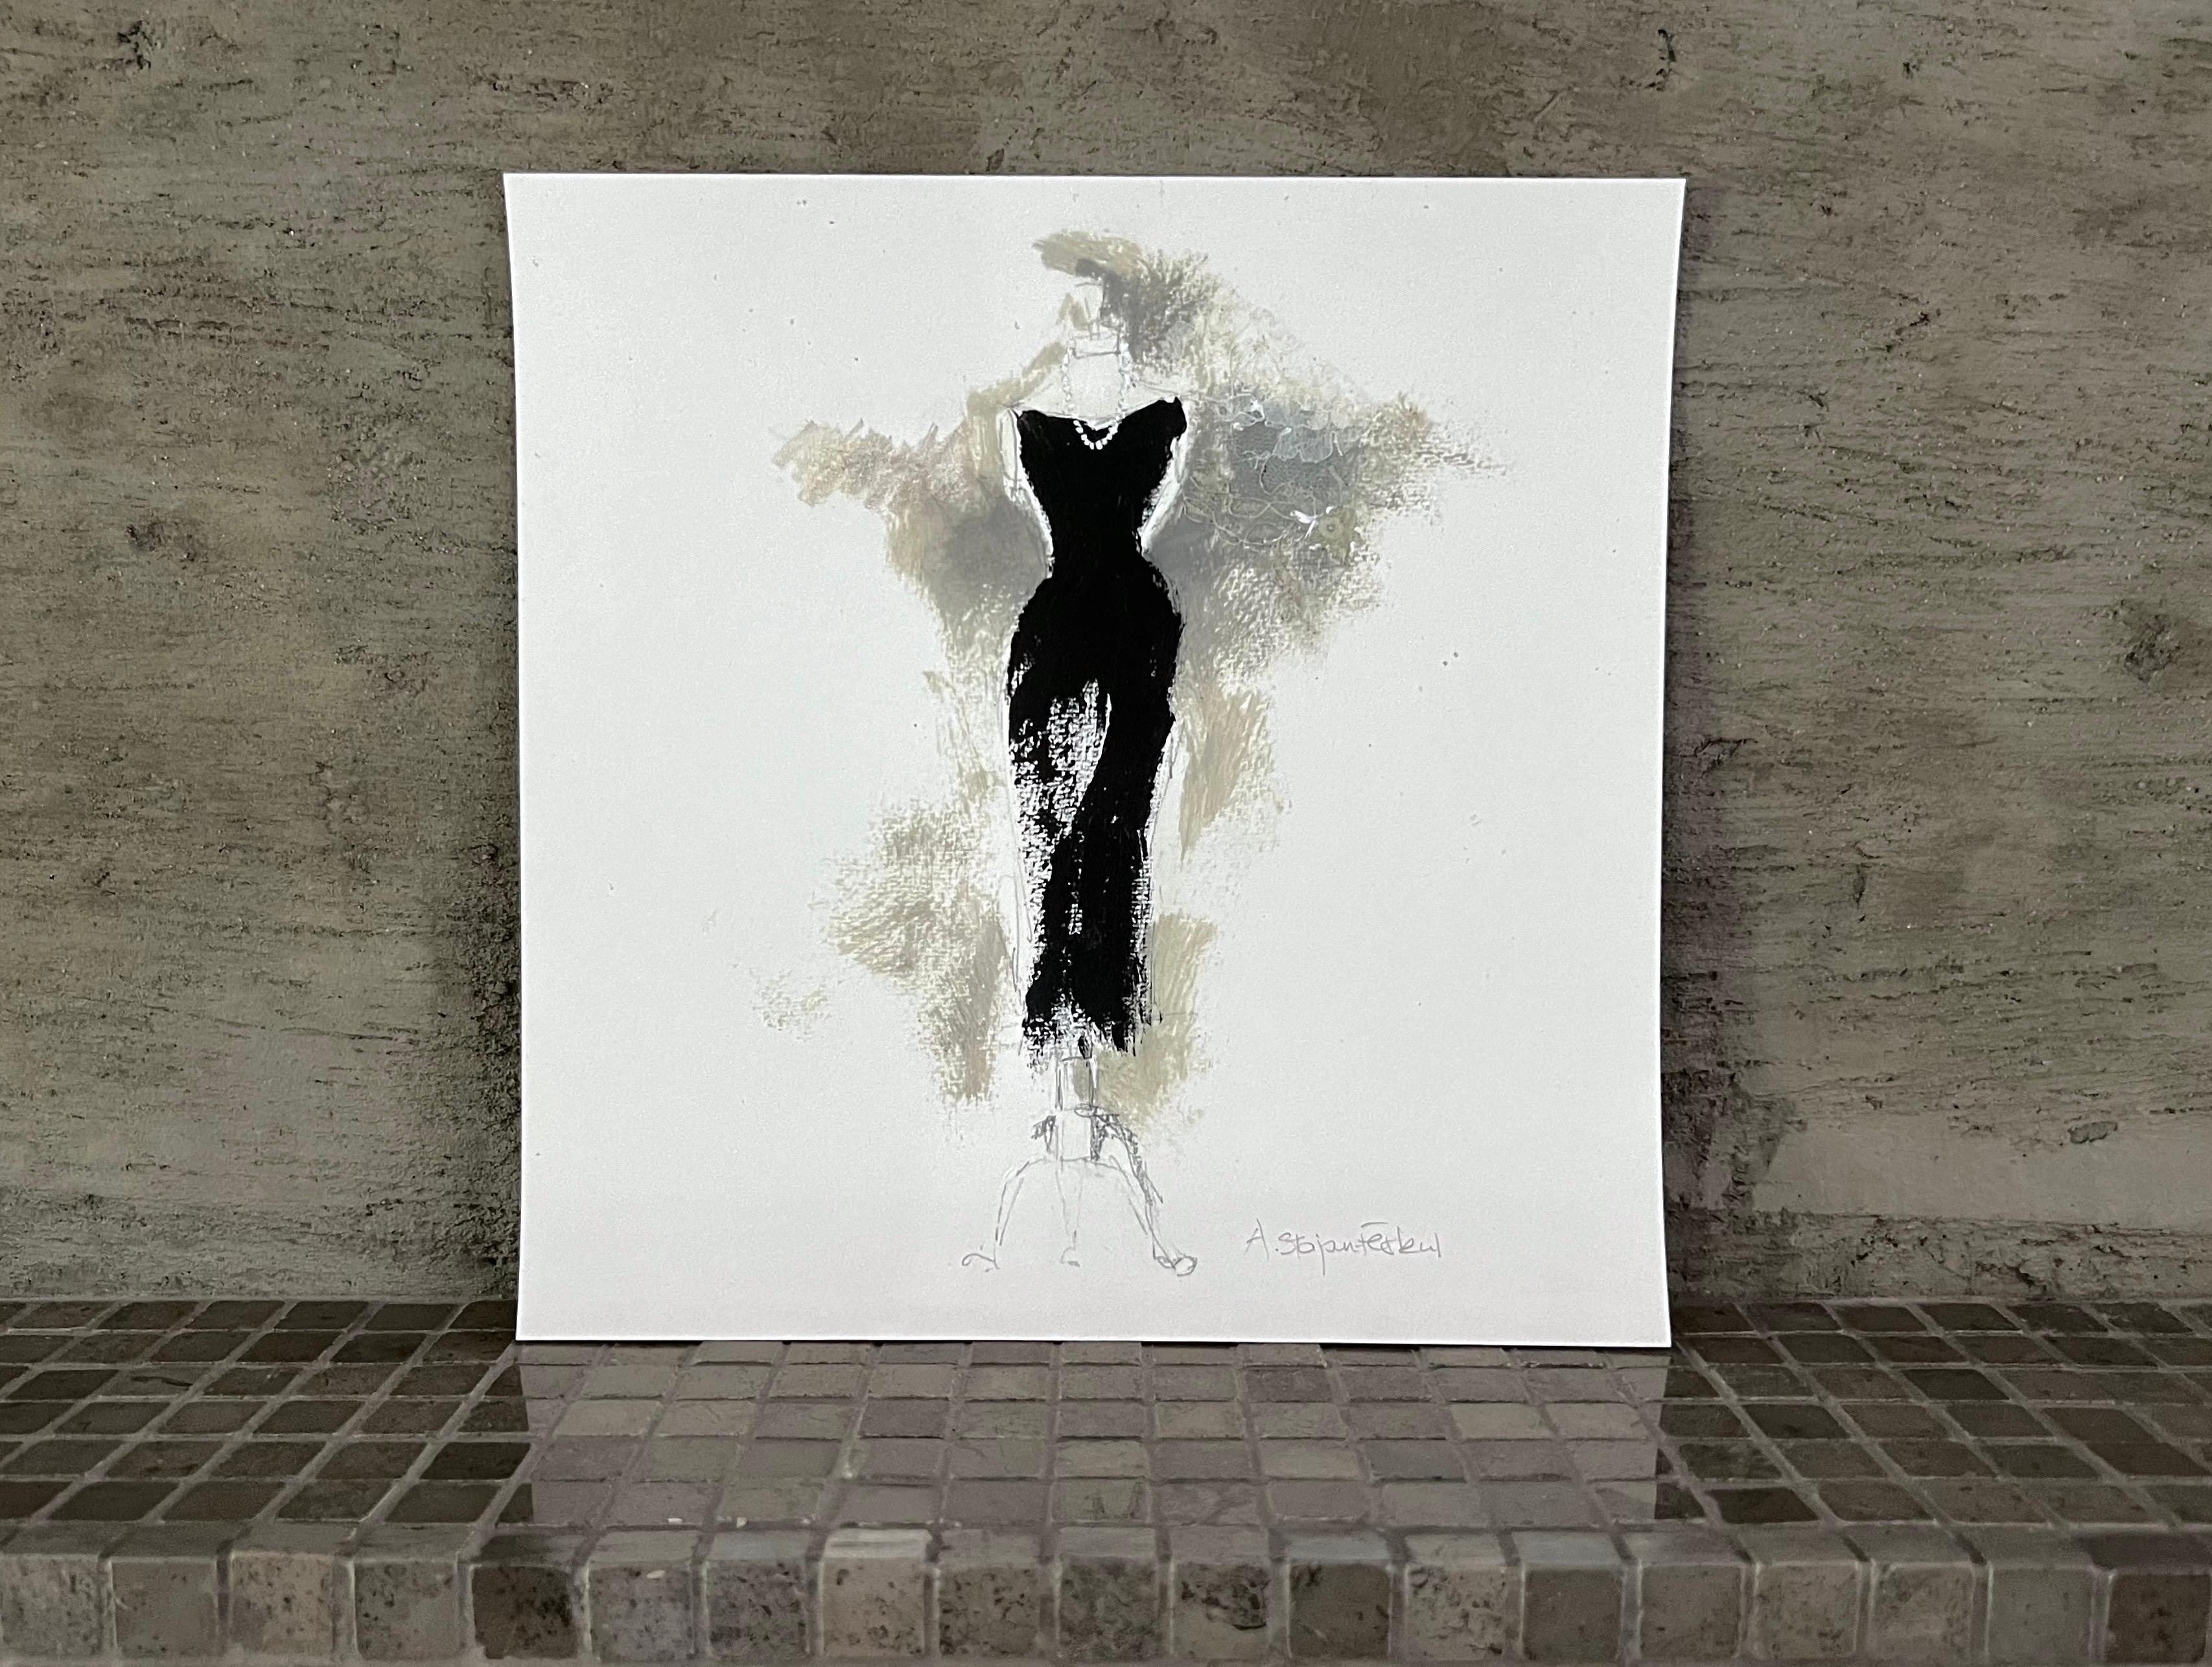 Homage to the iconic Little Black Dress. The fusion of digital and hand painted elements give this artwork distinct character and individuality. The one-of-a-kind Giclée print is a high-quality reproduction of an original artwork printed on archival